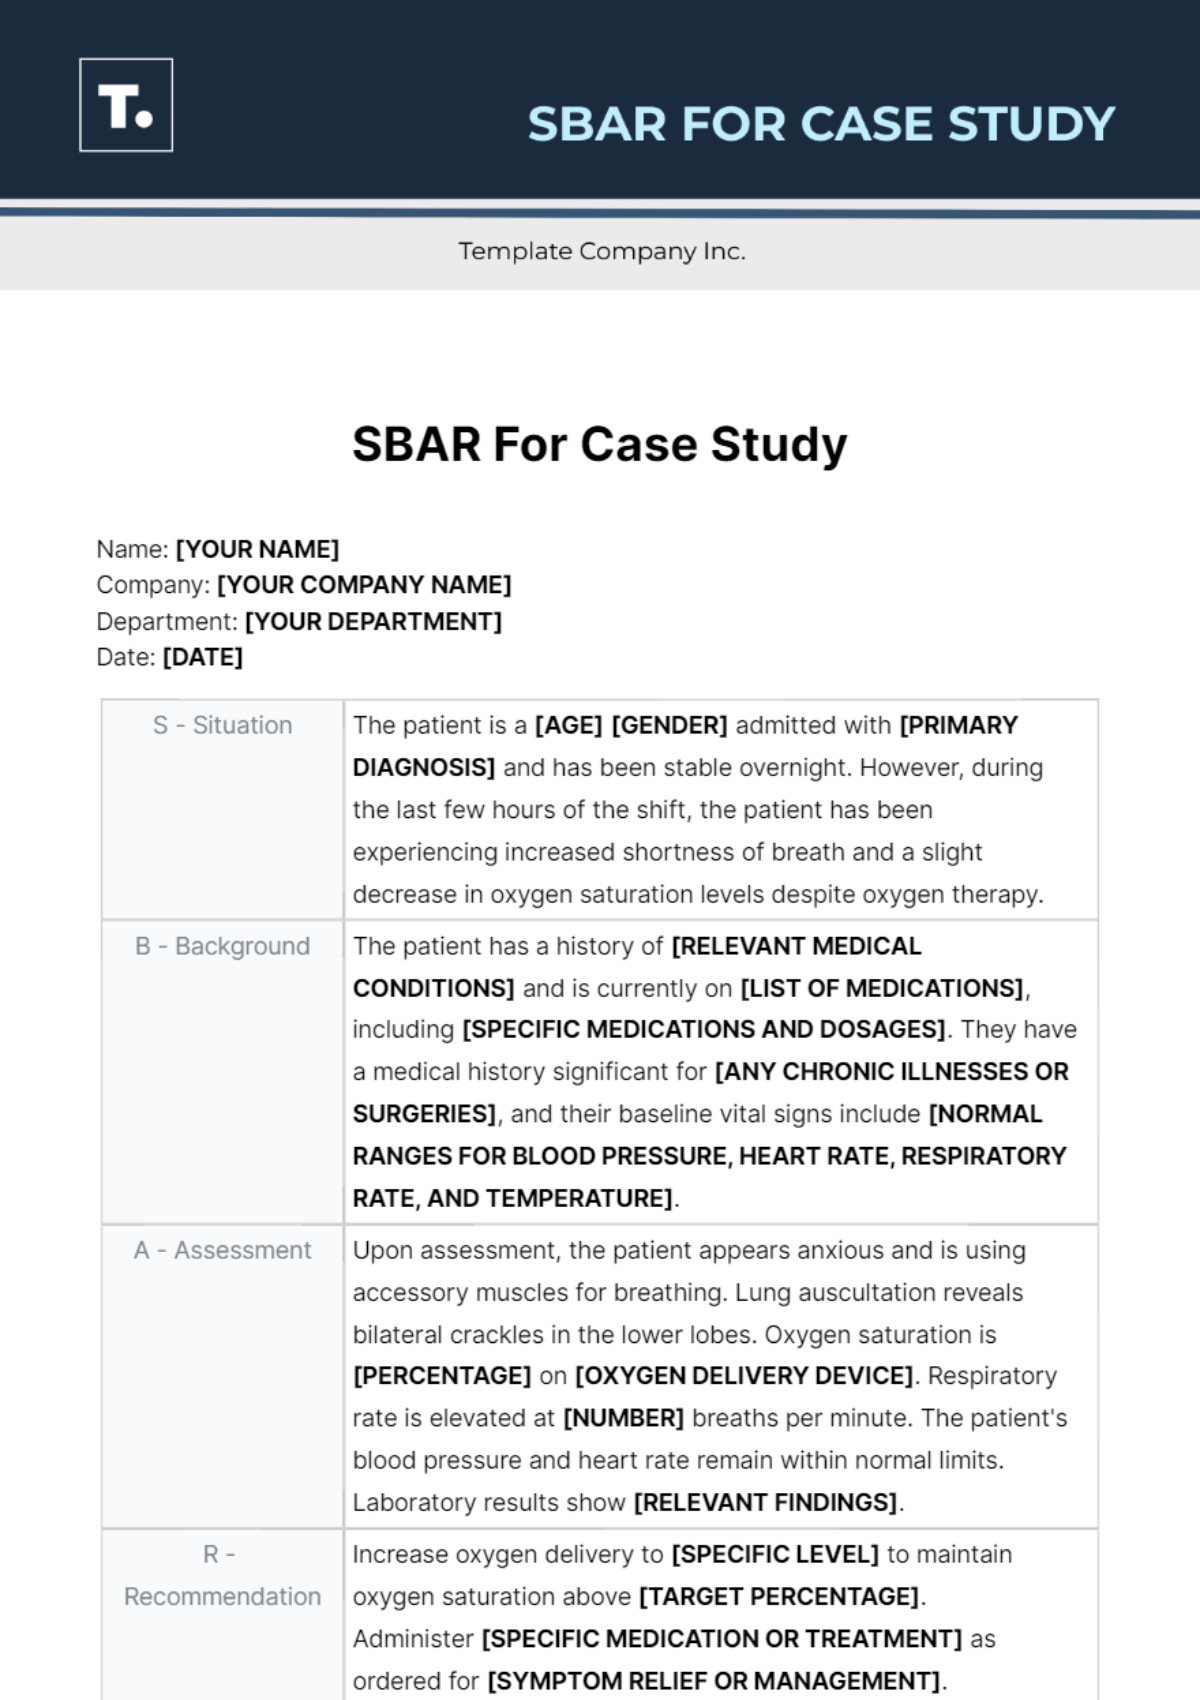 Free SBAR For Case Study Template